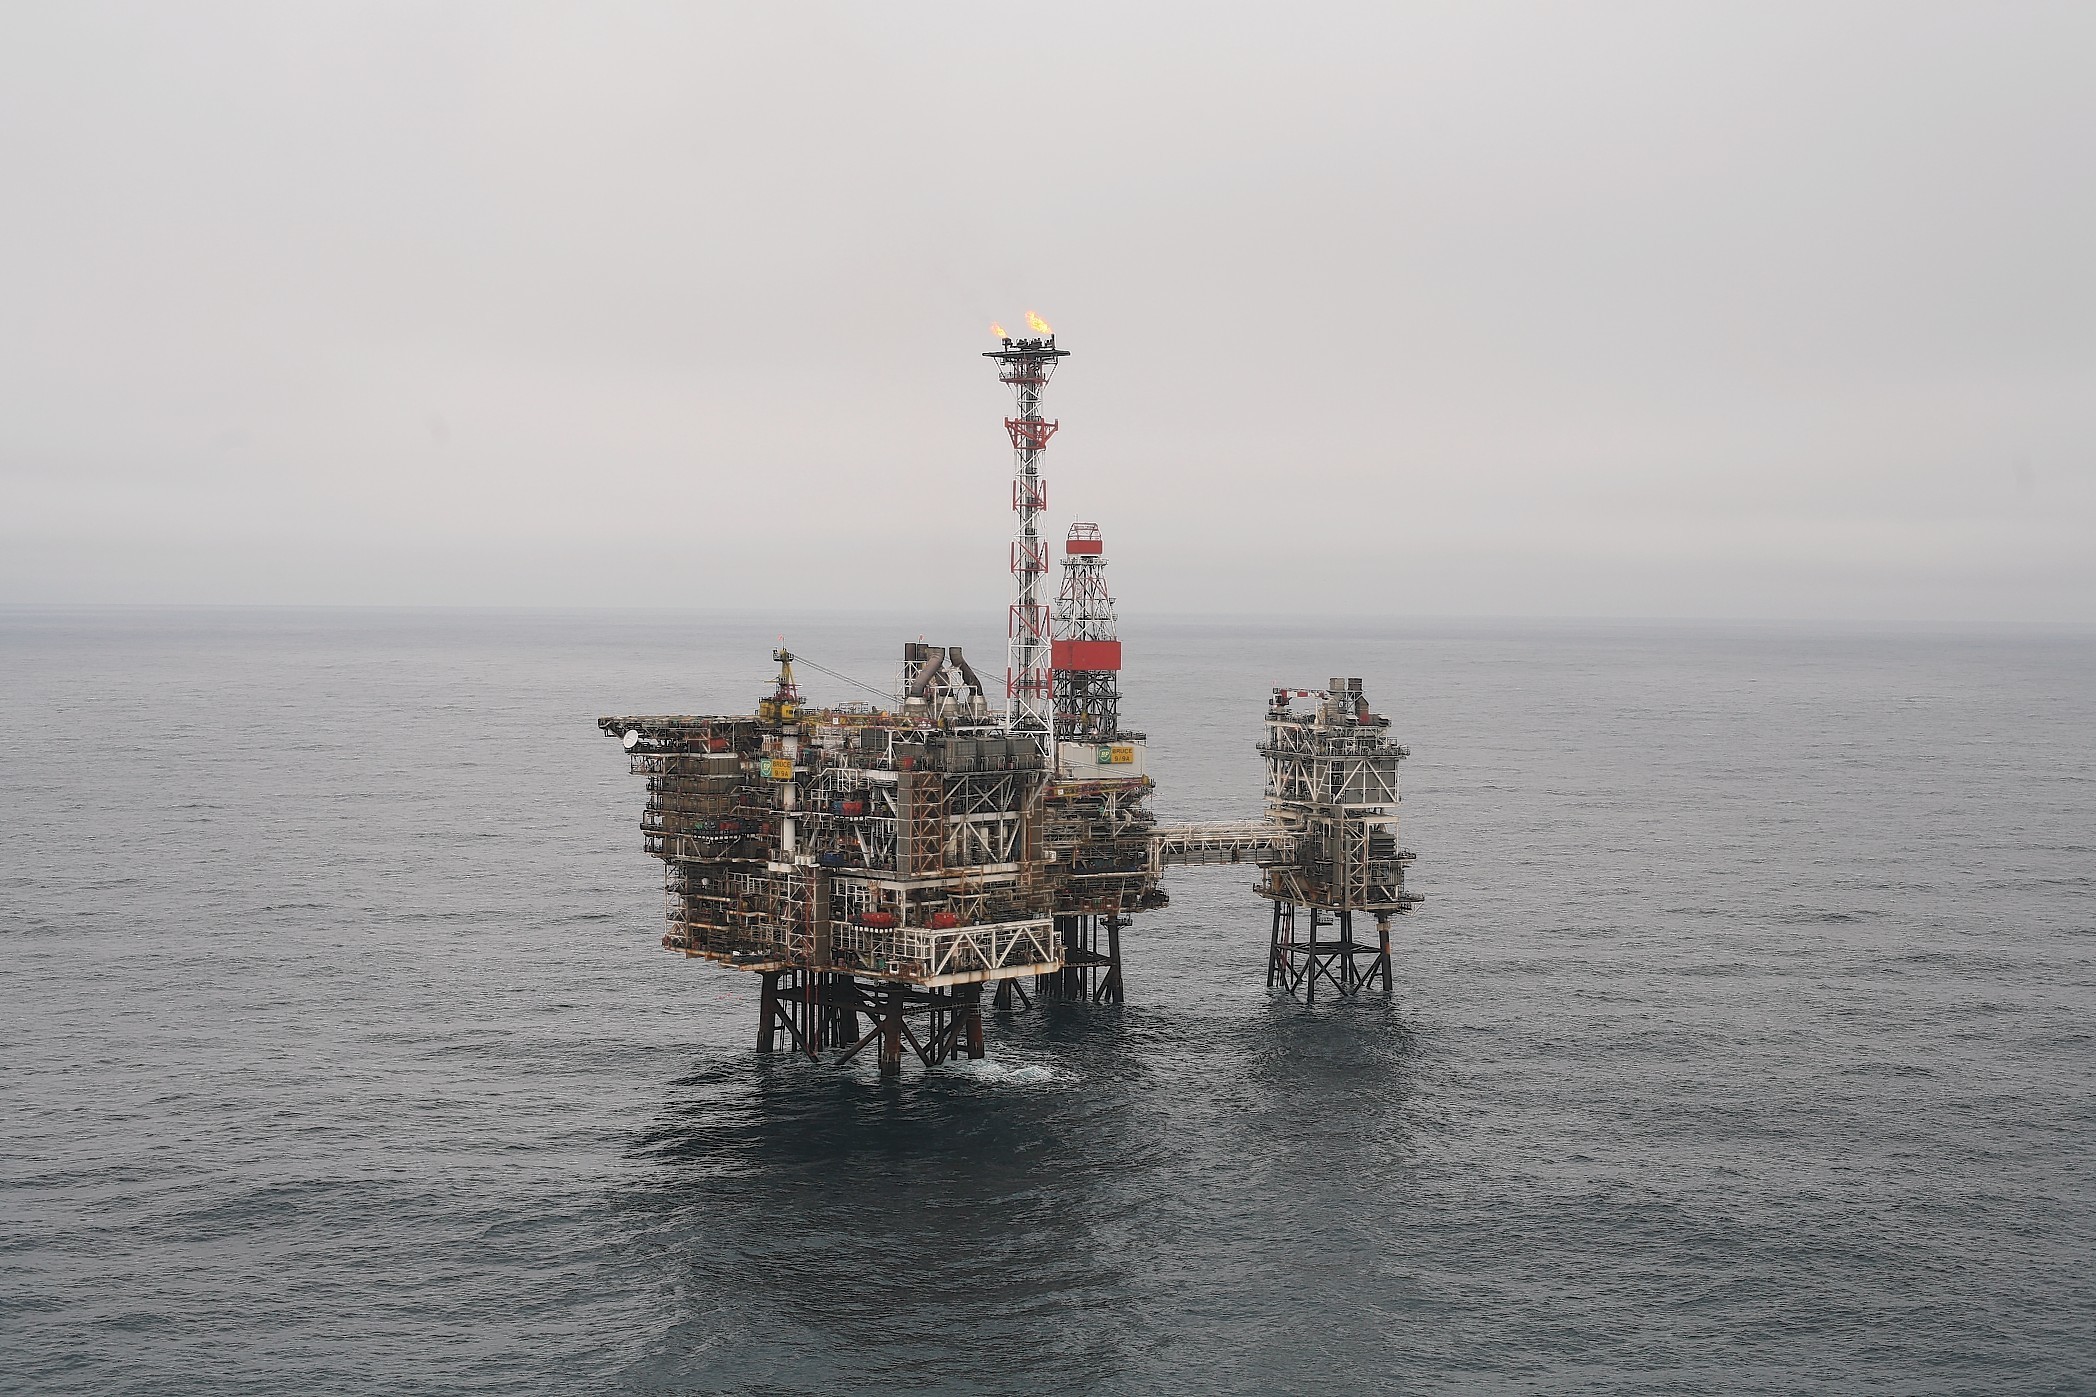 The Bruce platform in the North Sea